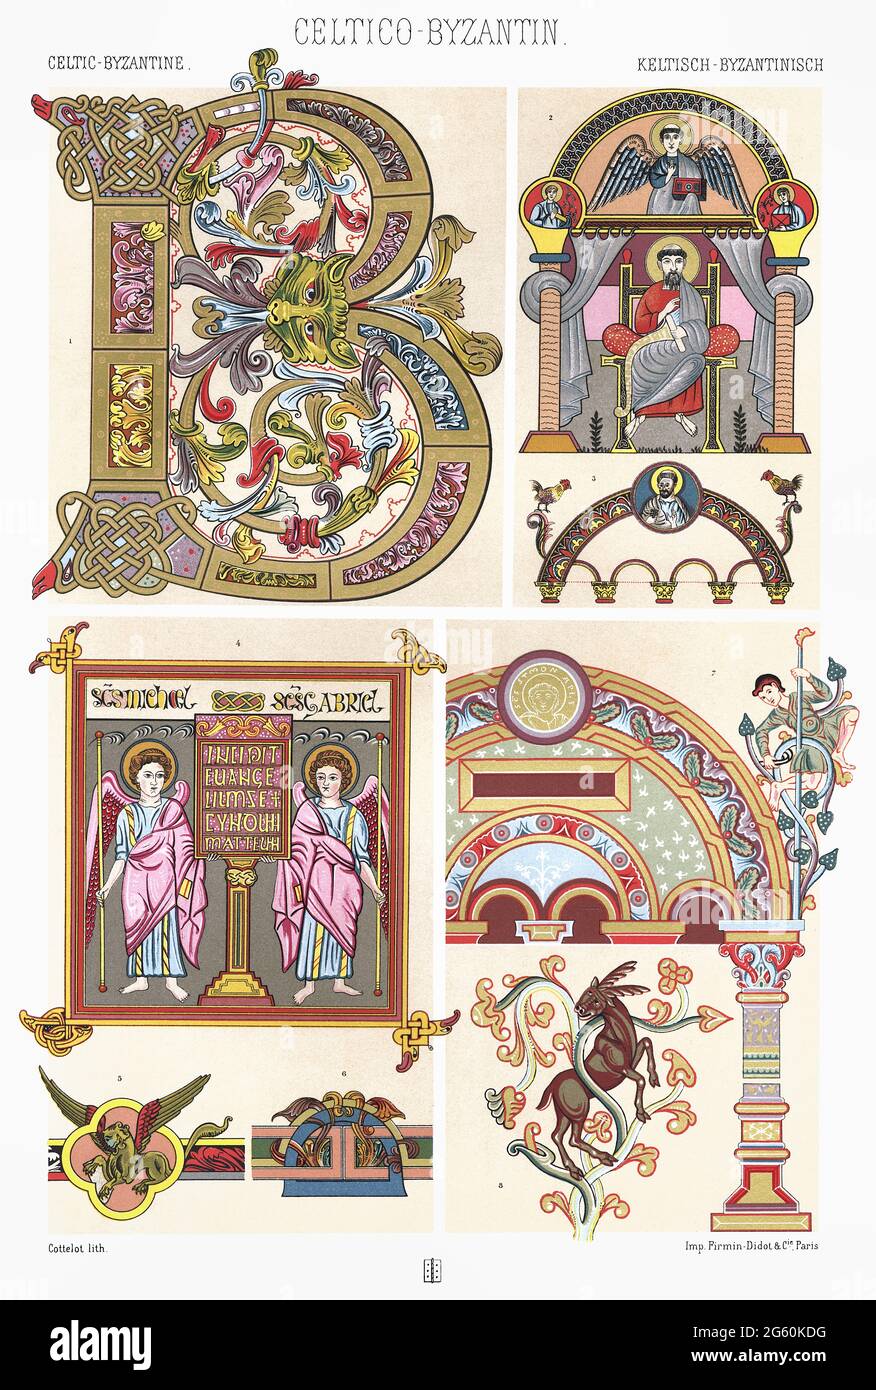 Celtic-Byzantine - Types of Decorative Painting - According to the Manuscript Illuminations - By The Ornament 1880. Stock Photo